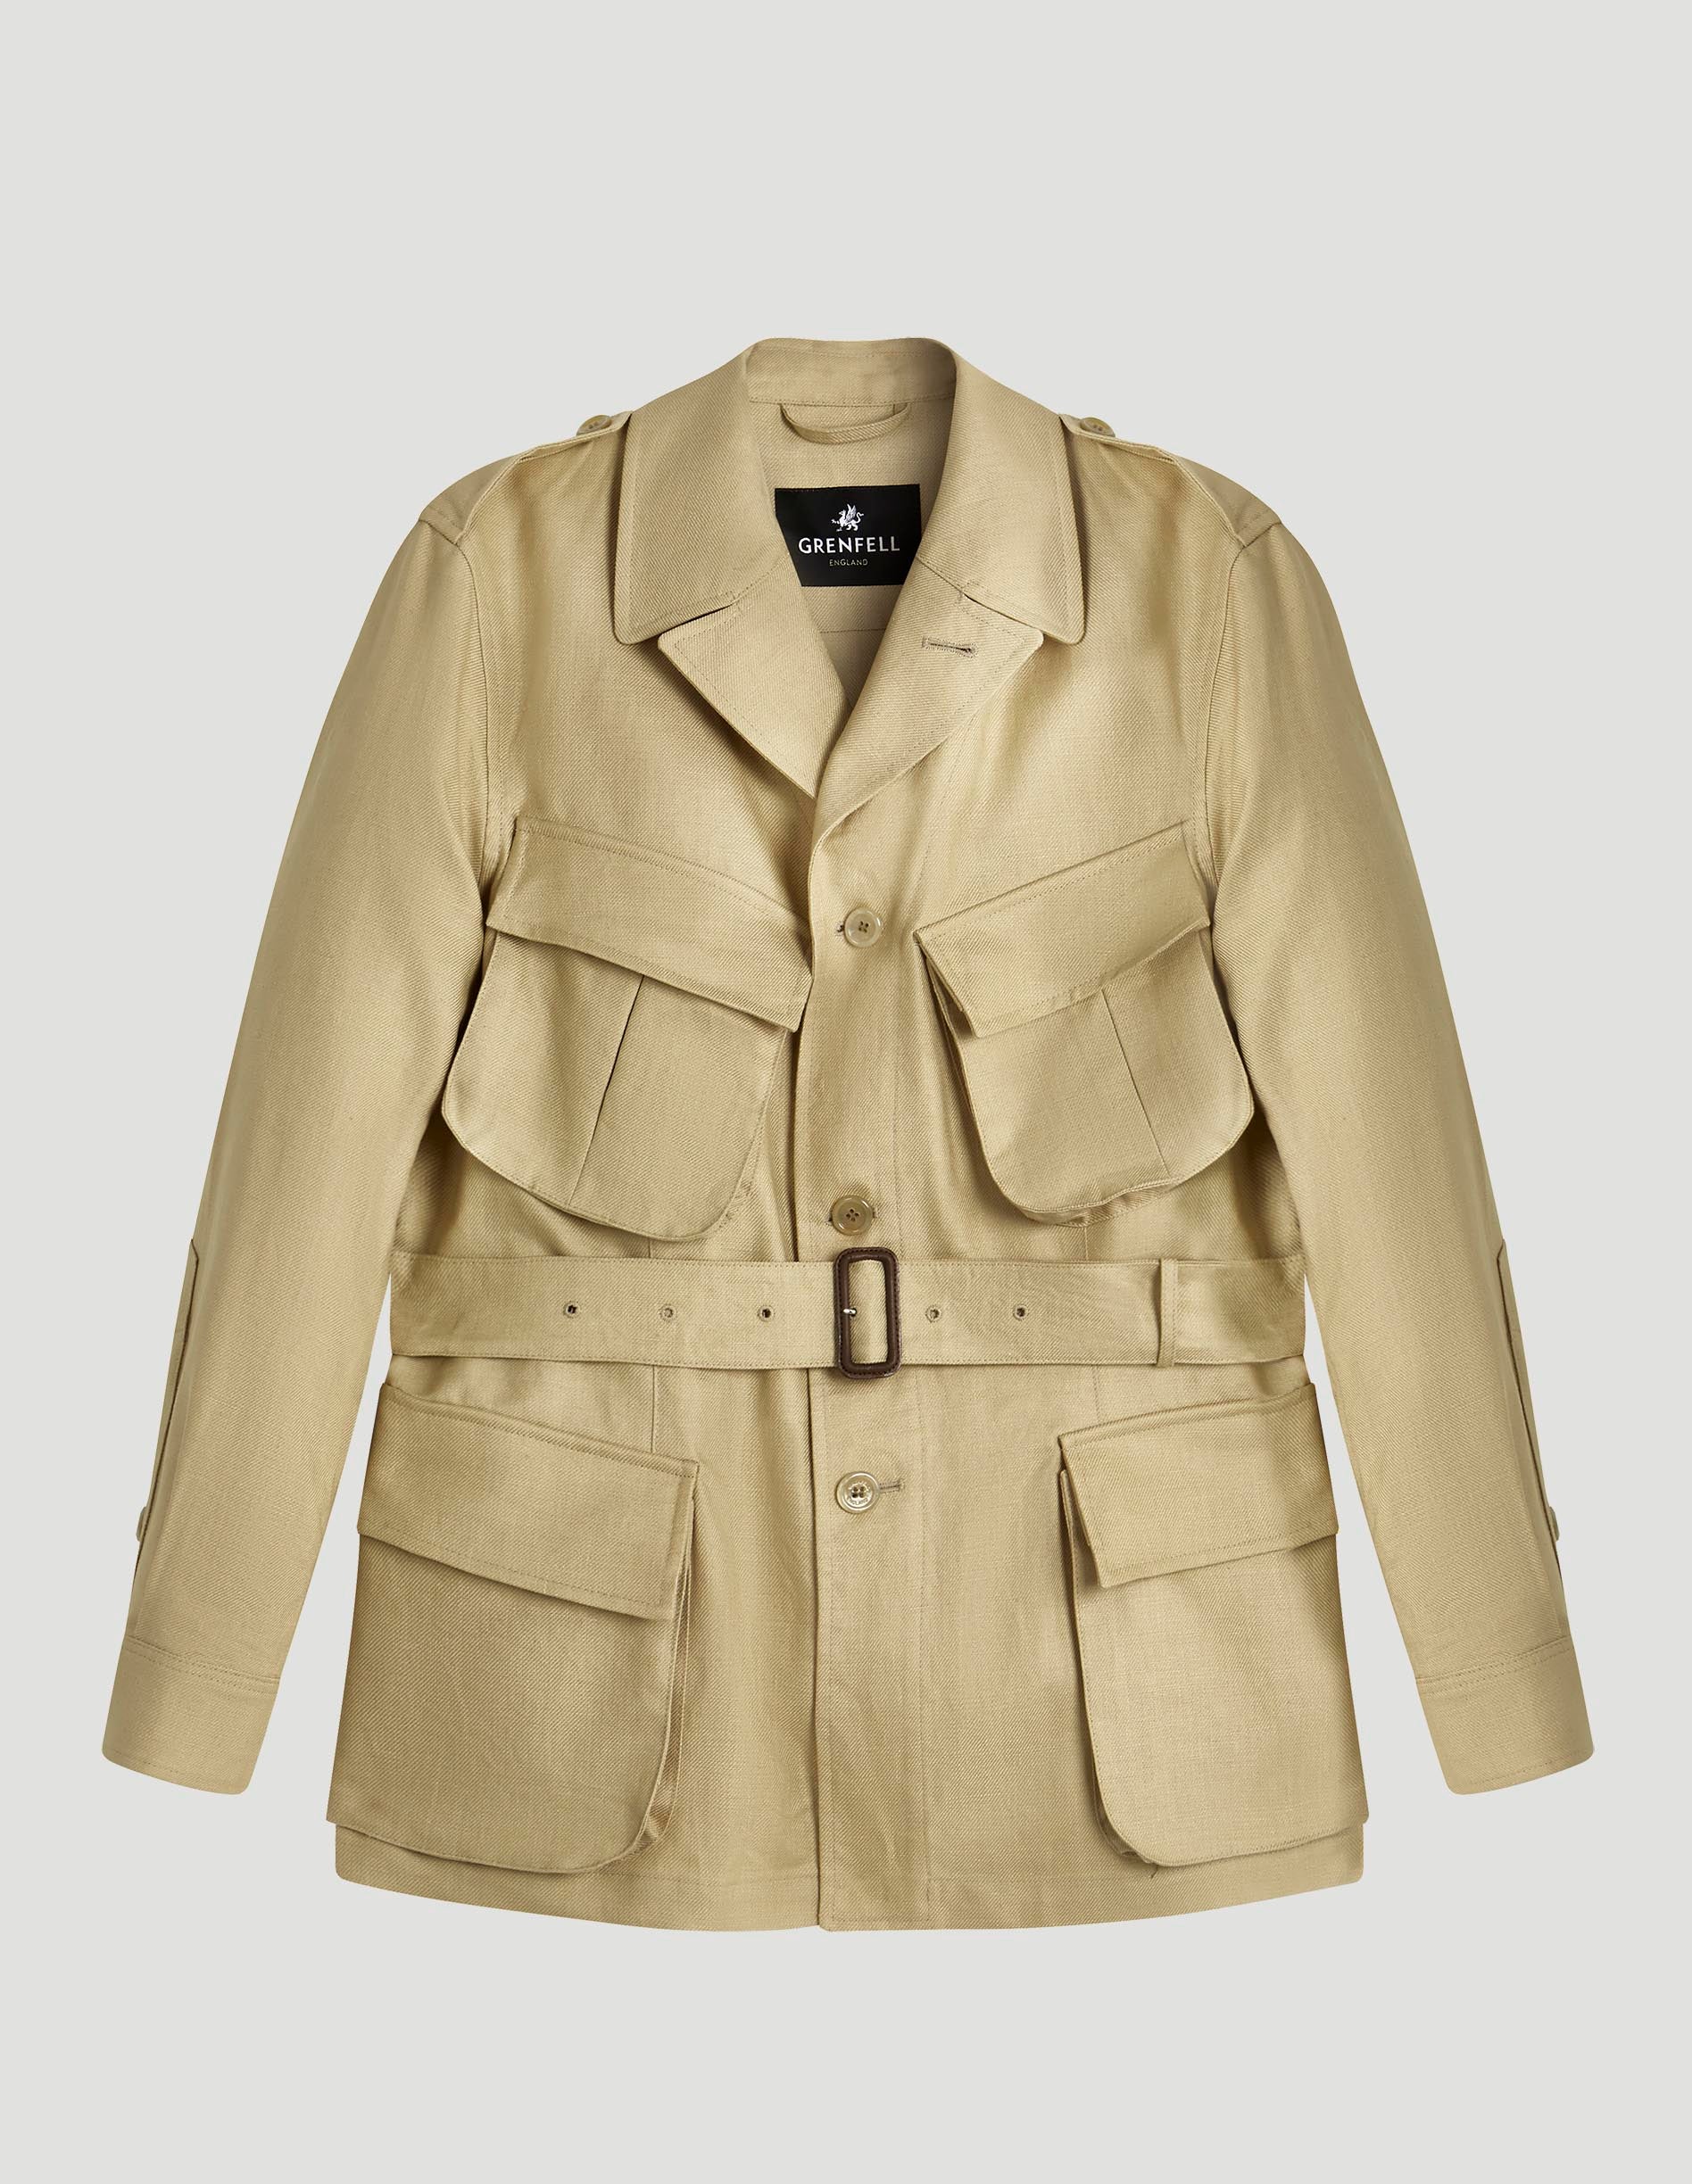 Men's Luxury Coats, Jackets & Parkas with Grenfell